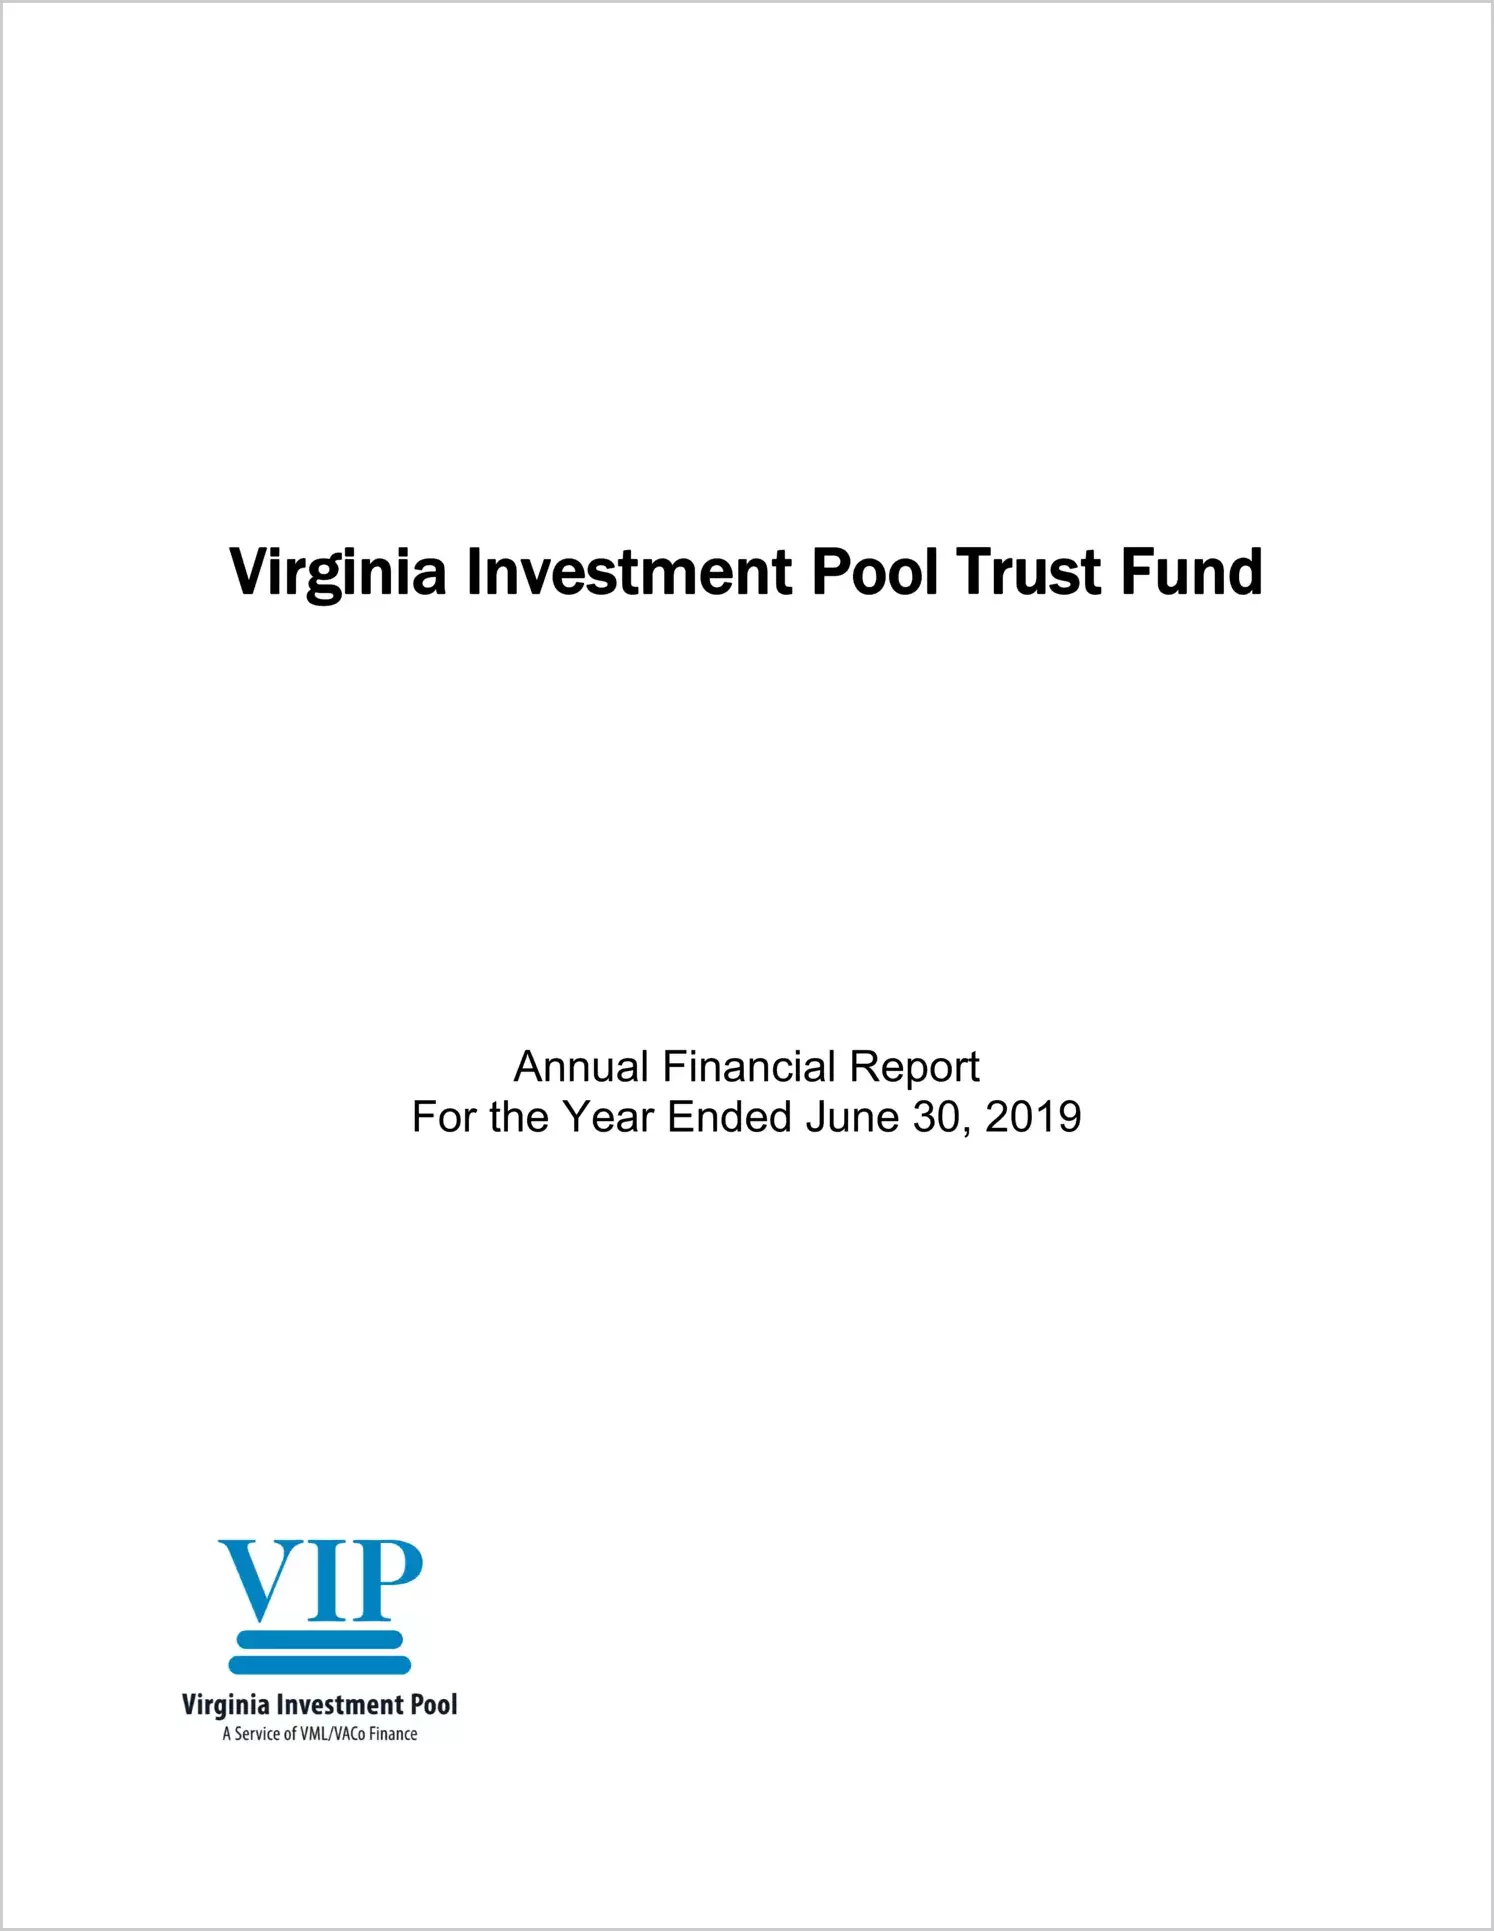 2019 ABC/Other Annual Financial Report  for Virginia Investment Pool Trust Fund